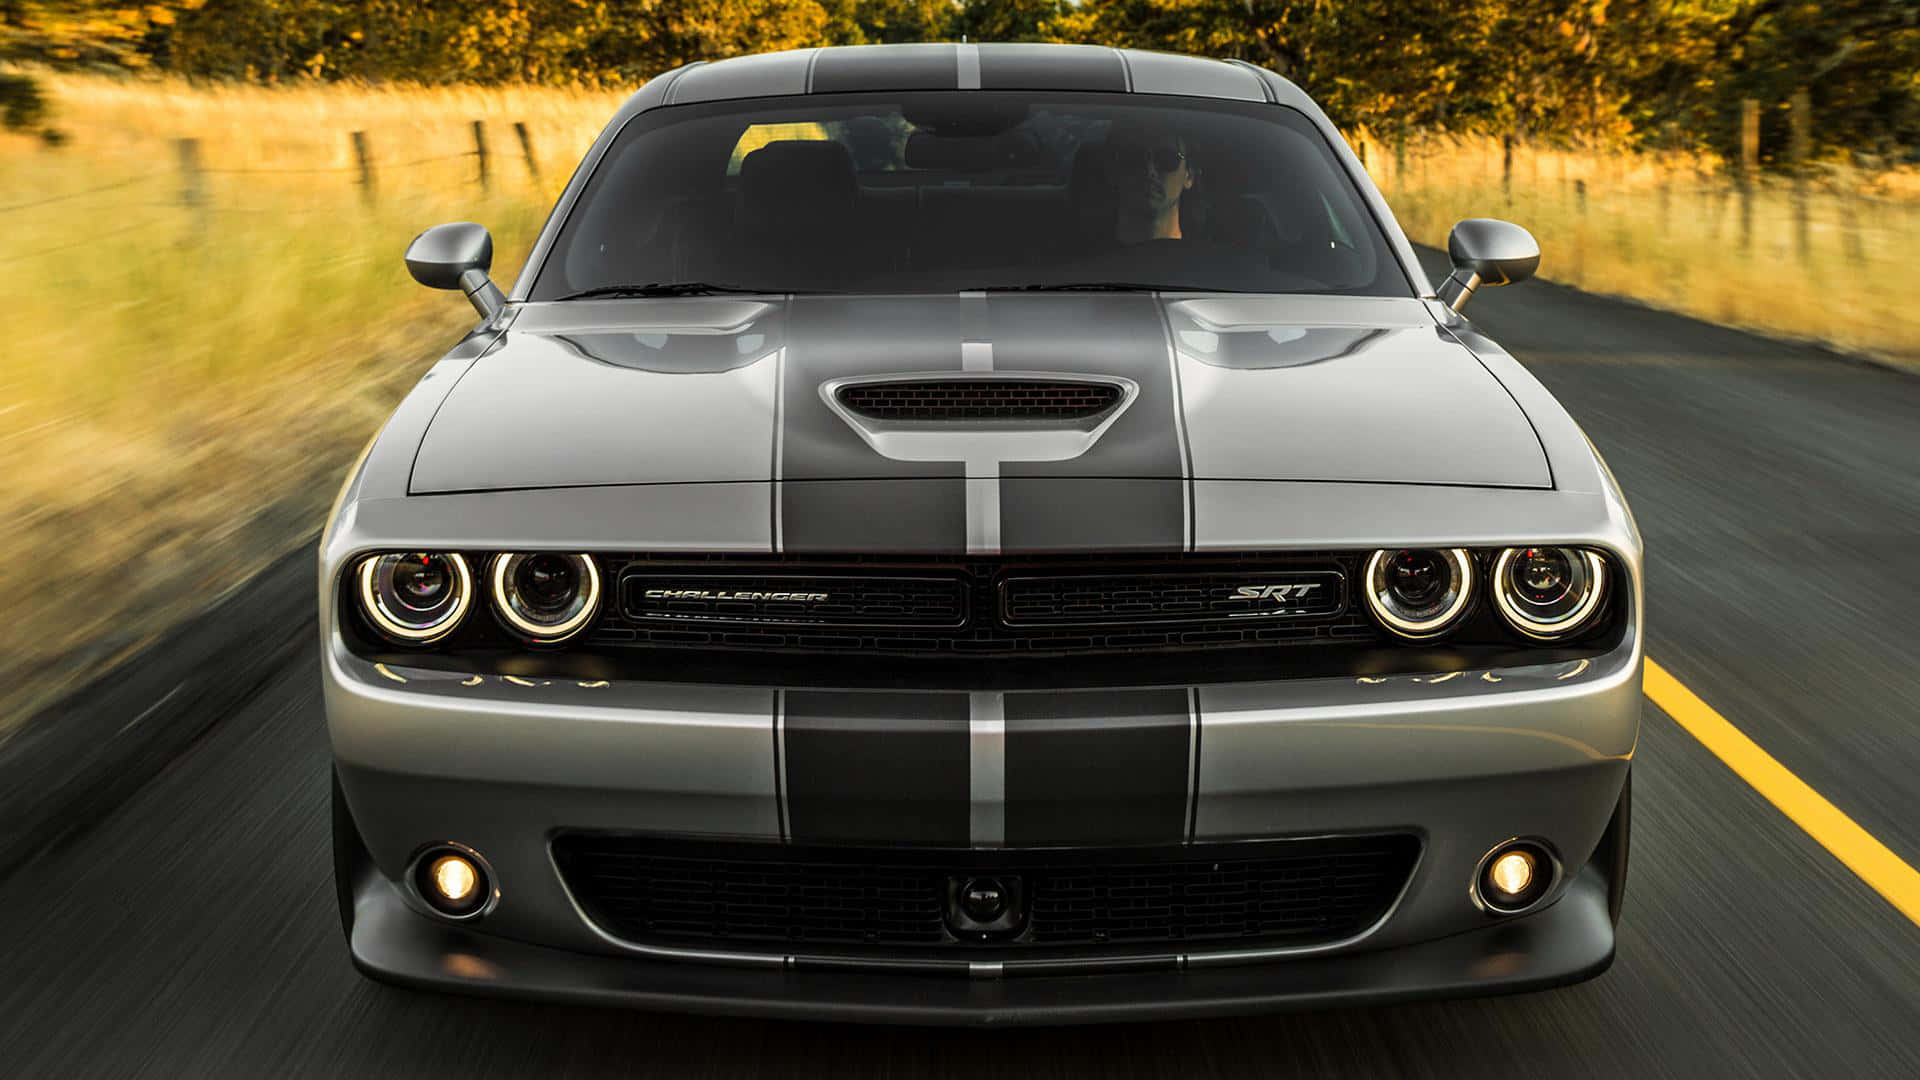 Dodge Challenger S R T On The Road Wallpaper